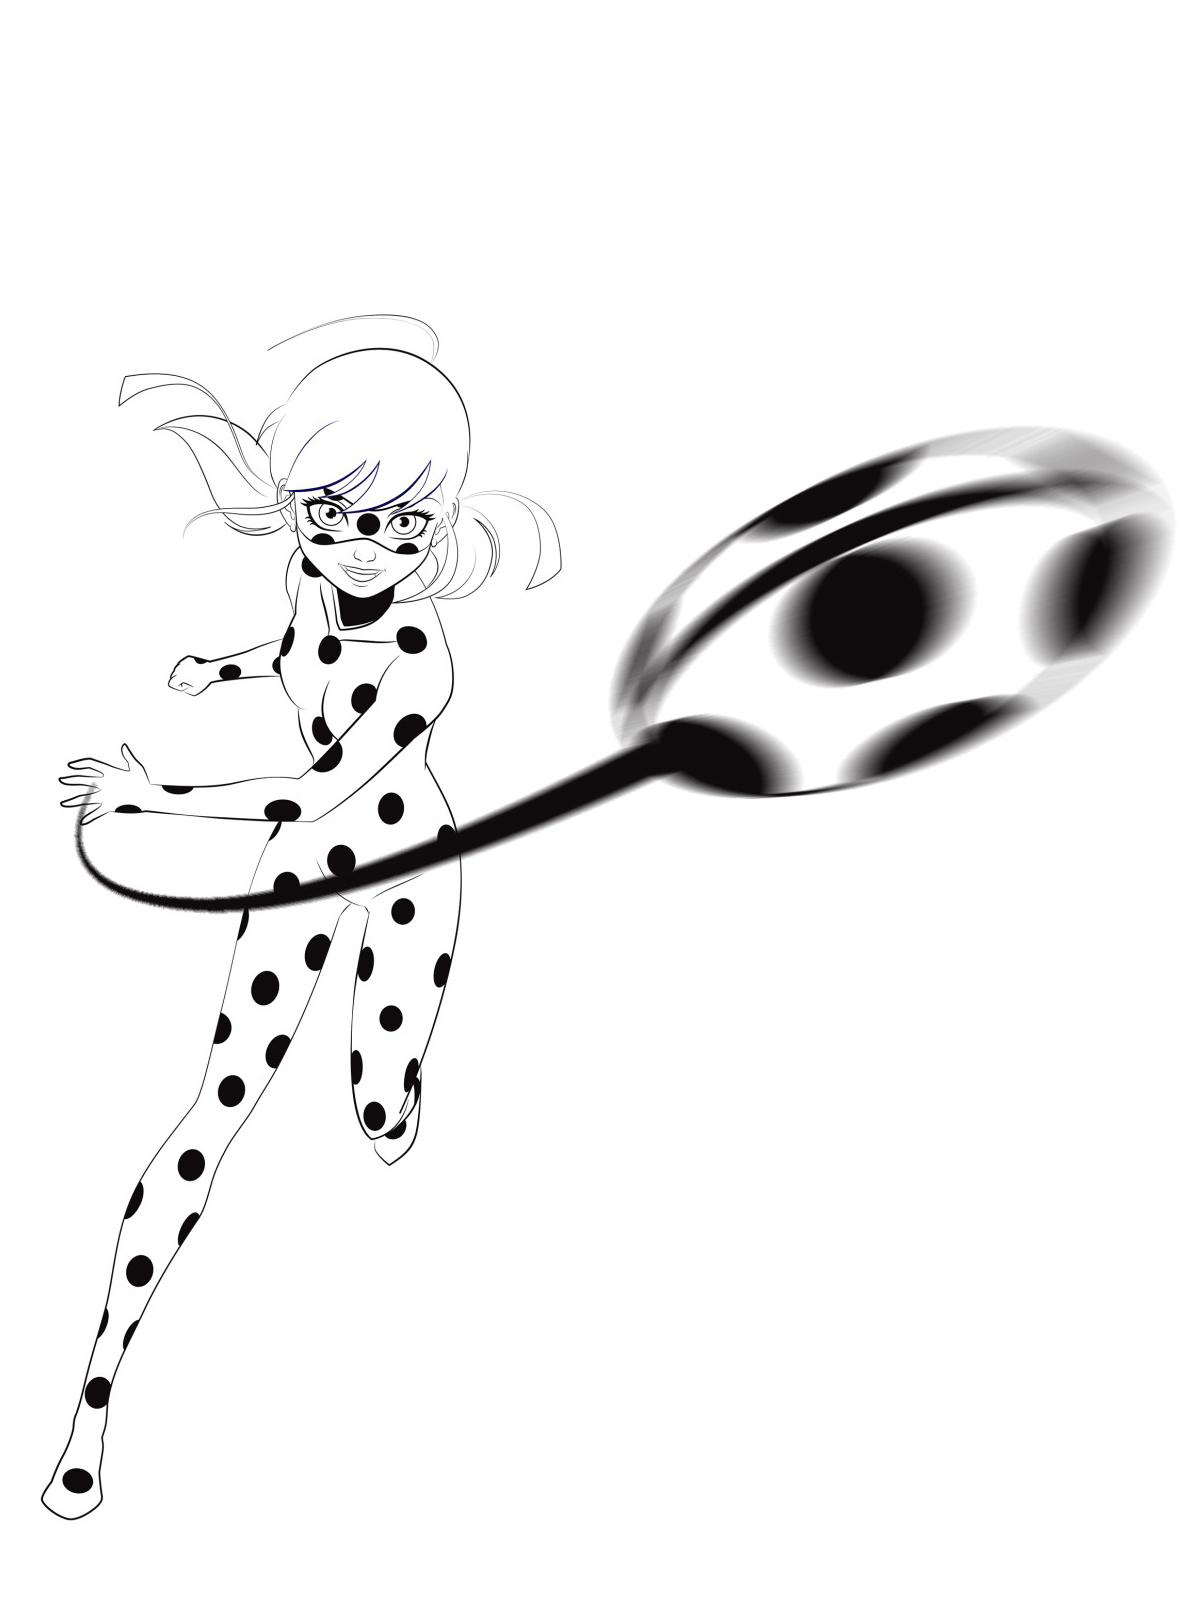 Miraculous Ladybug coloring pages - YouLoveIt.com